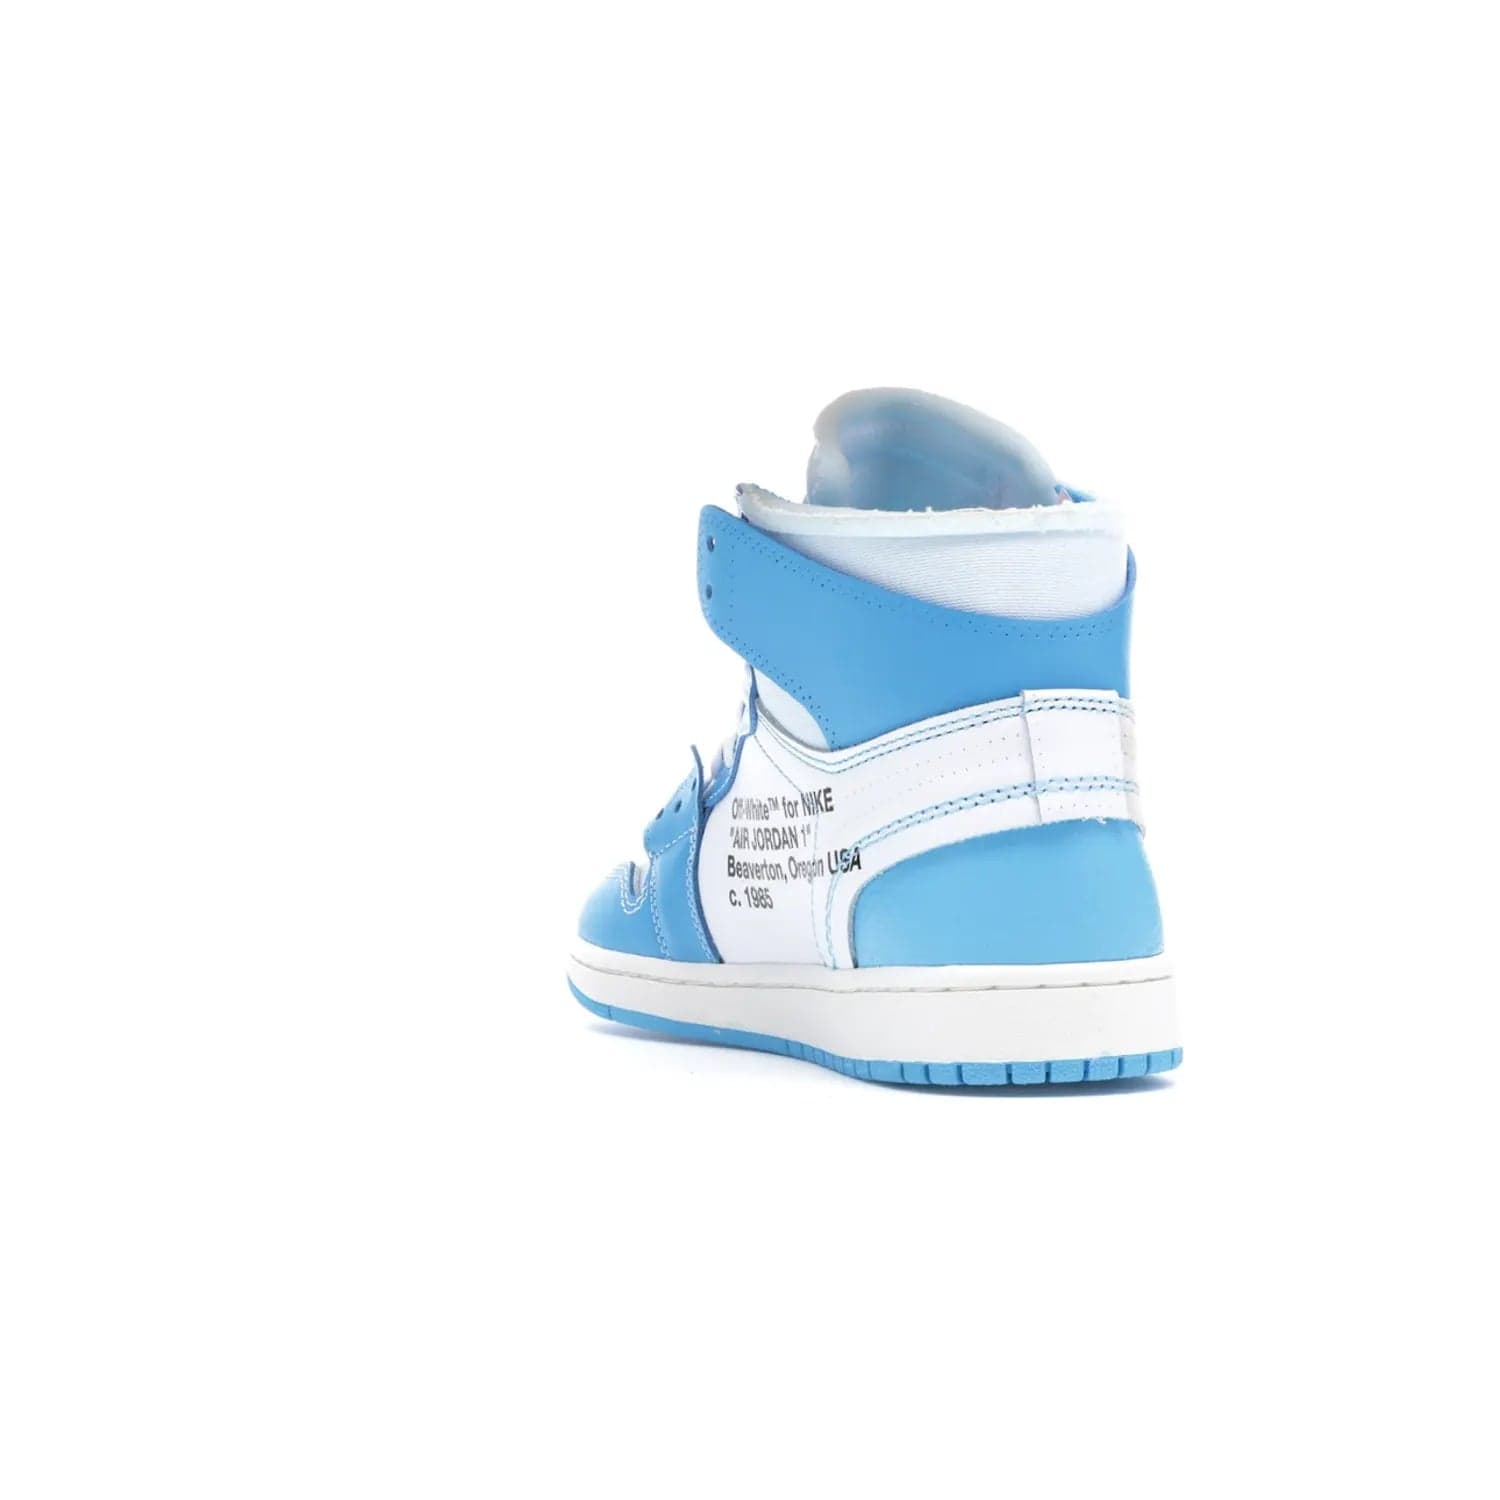 Jordan 1 Retro High Off-White University Blue - Image 26 - Only at www.BallersClubKickz.com - Classic Jordan 1 Retro High "Off-White UNC" sneakers meld style and comfort. Boasting deconstructed white and blue leather, Off-White detailing, and a white, dark powder blue and cone colorway, these sneakers are perfect for dressing up or down. Get the iconic Off-White Jordan 1's and upgrade your look.